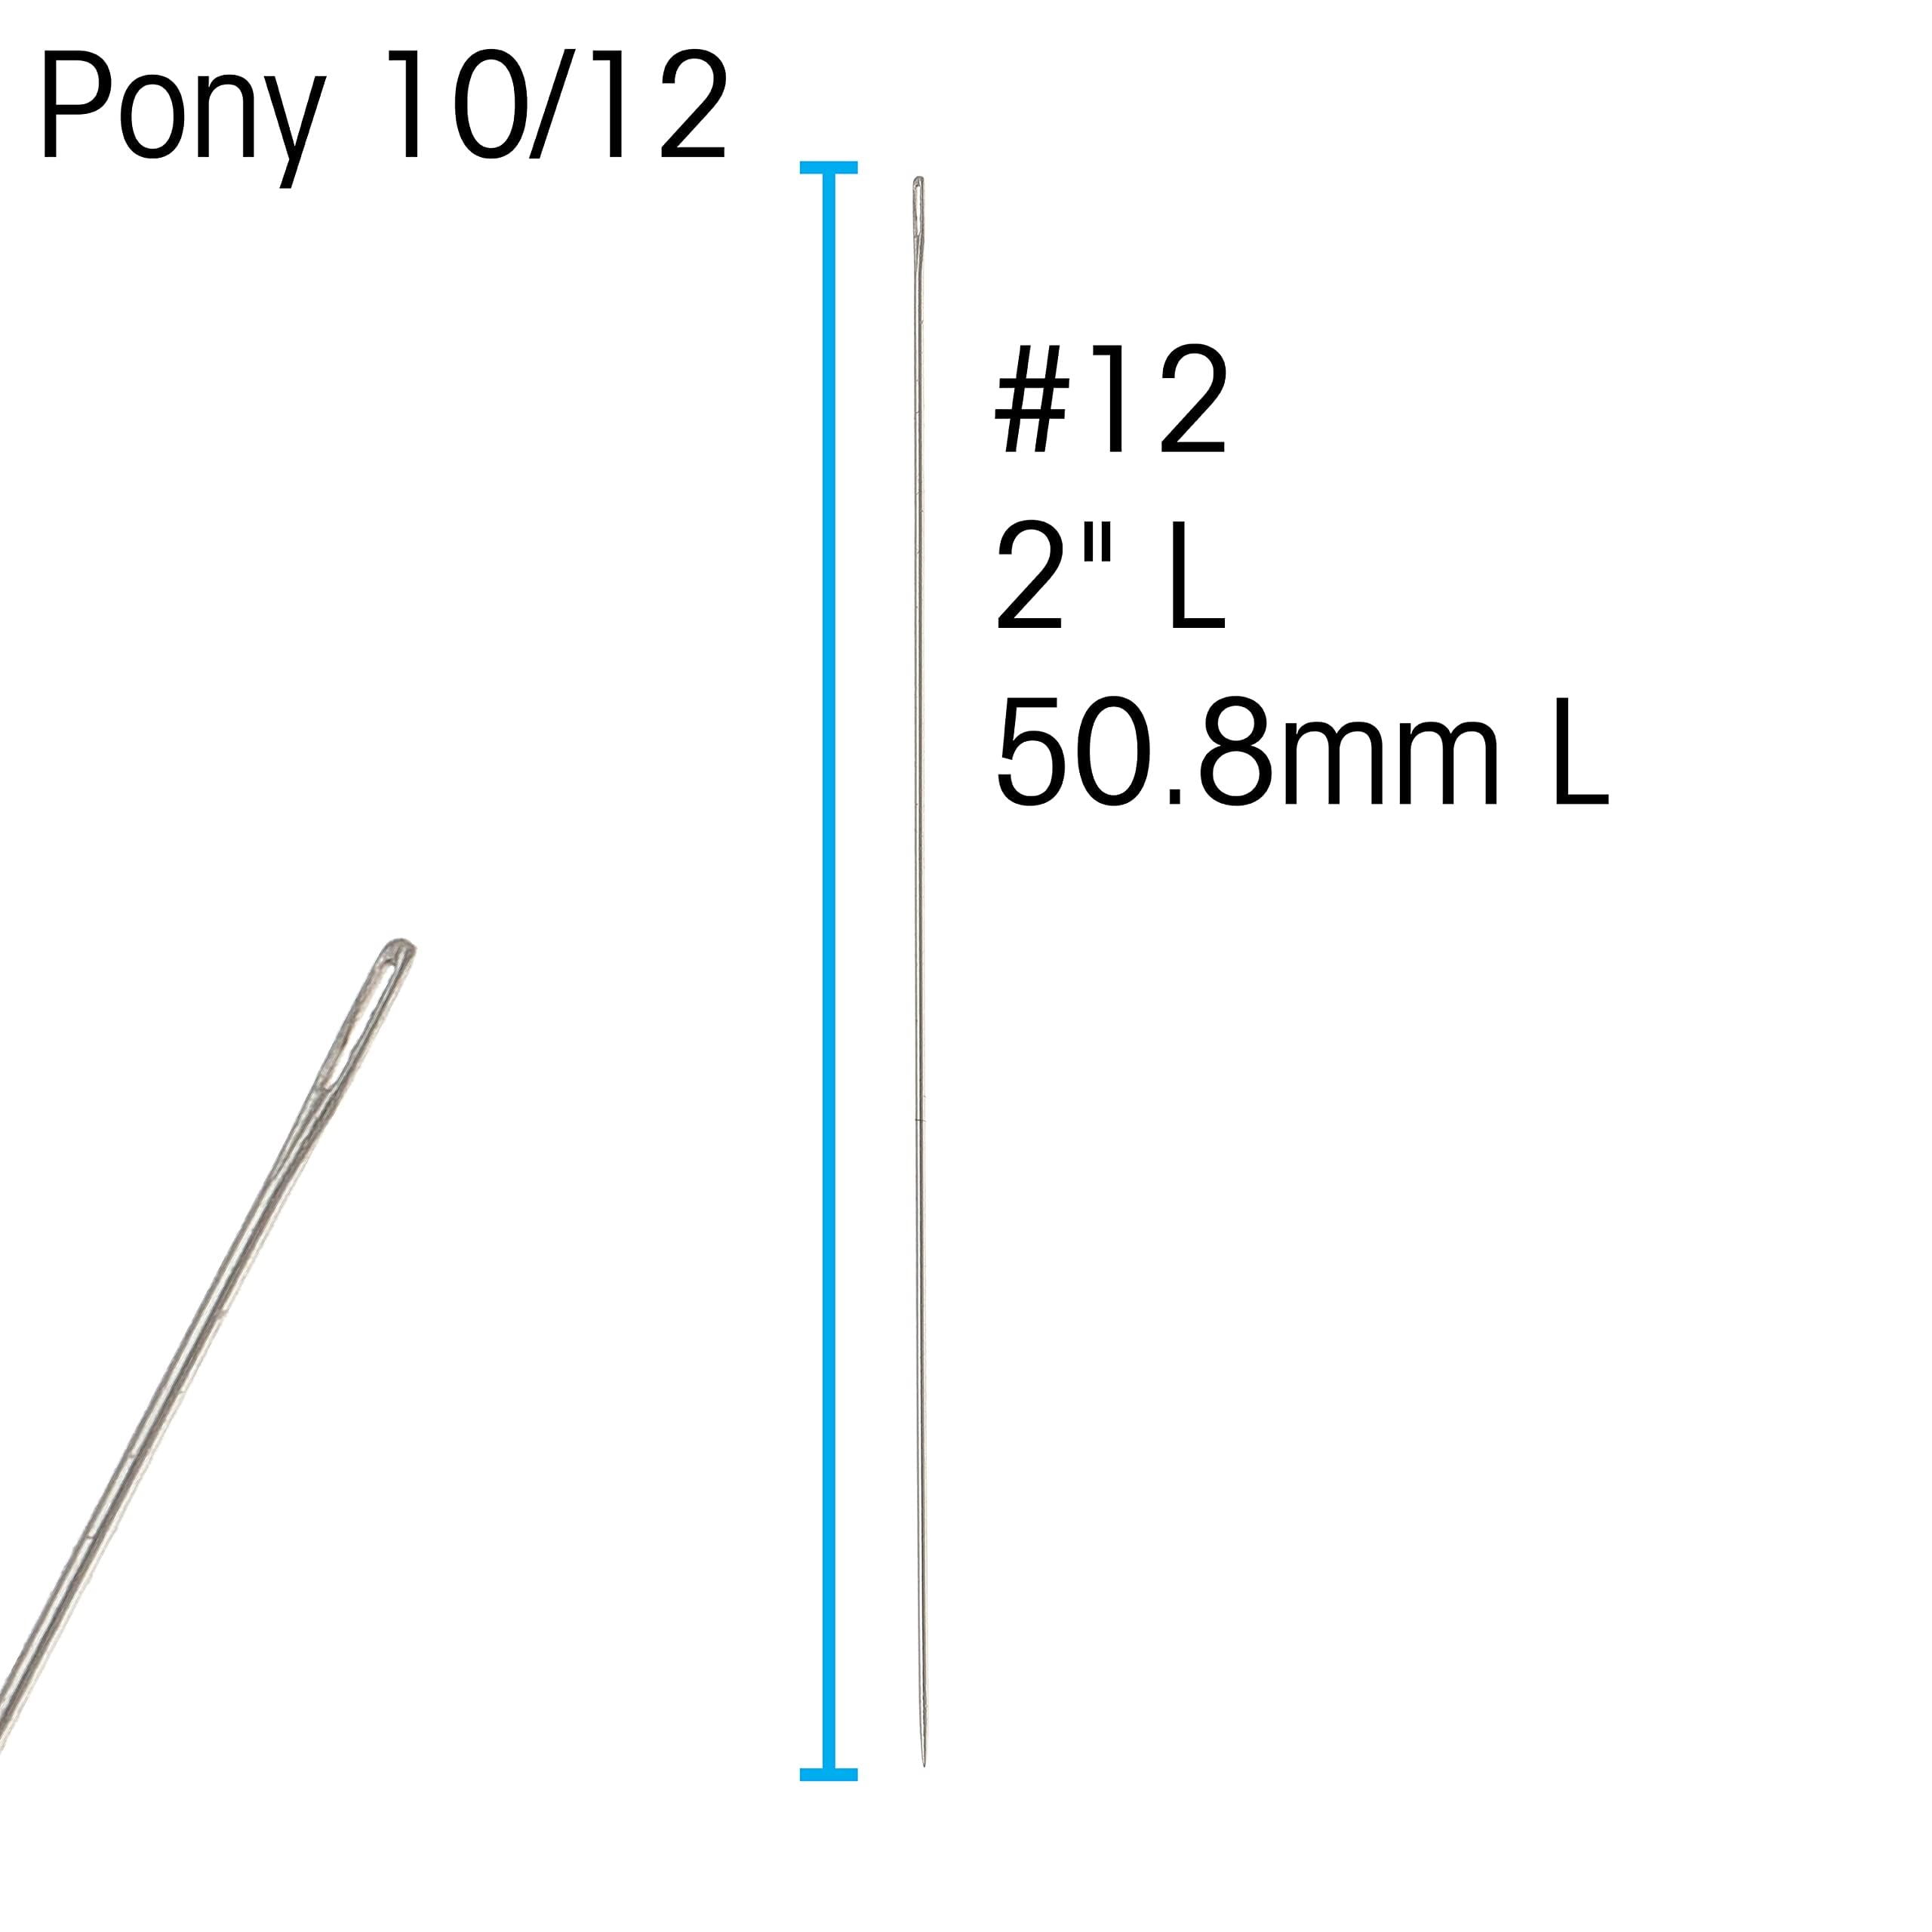 Pony Beading Needles, Size 11, Pack of 6, 4.5 Inches, Made in India, Use  for Loom Weaving Beadwork, Off-Loom Stitching and Jewelry Making with Seed